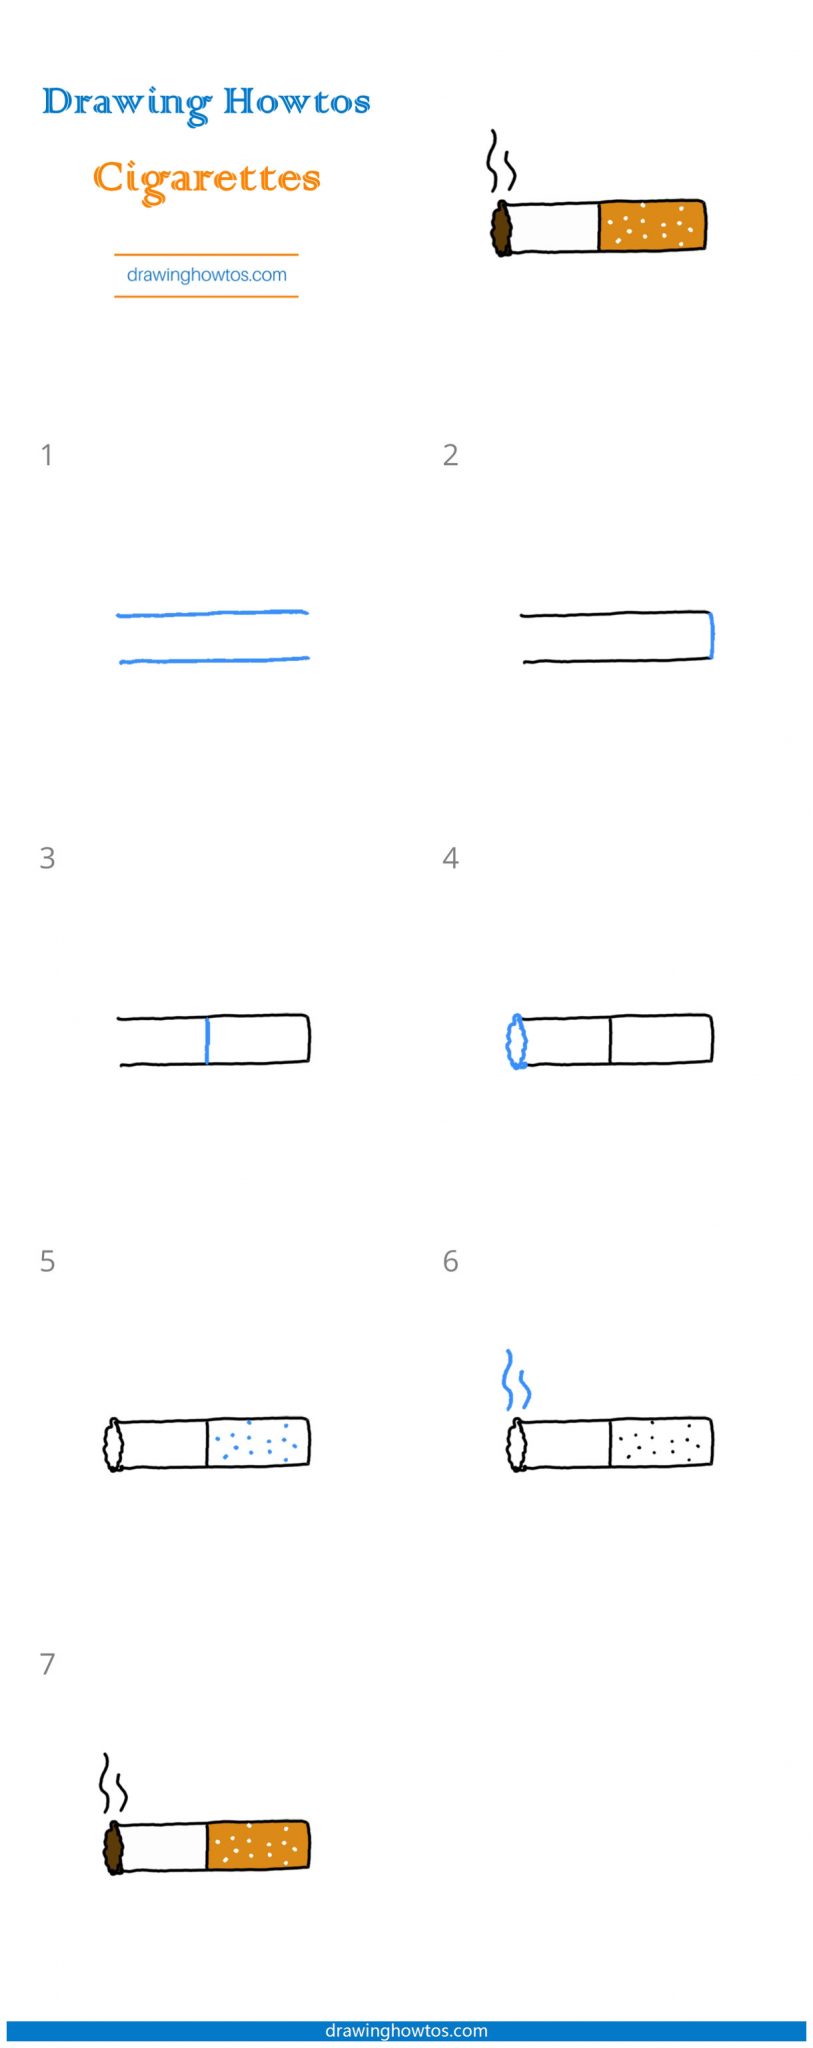 How to Draw a Cigarette Step by Step Easy Drawing Guides Drawing Howtos